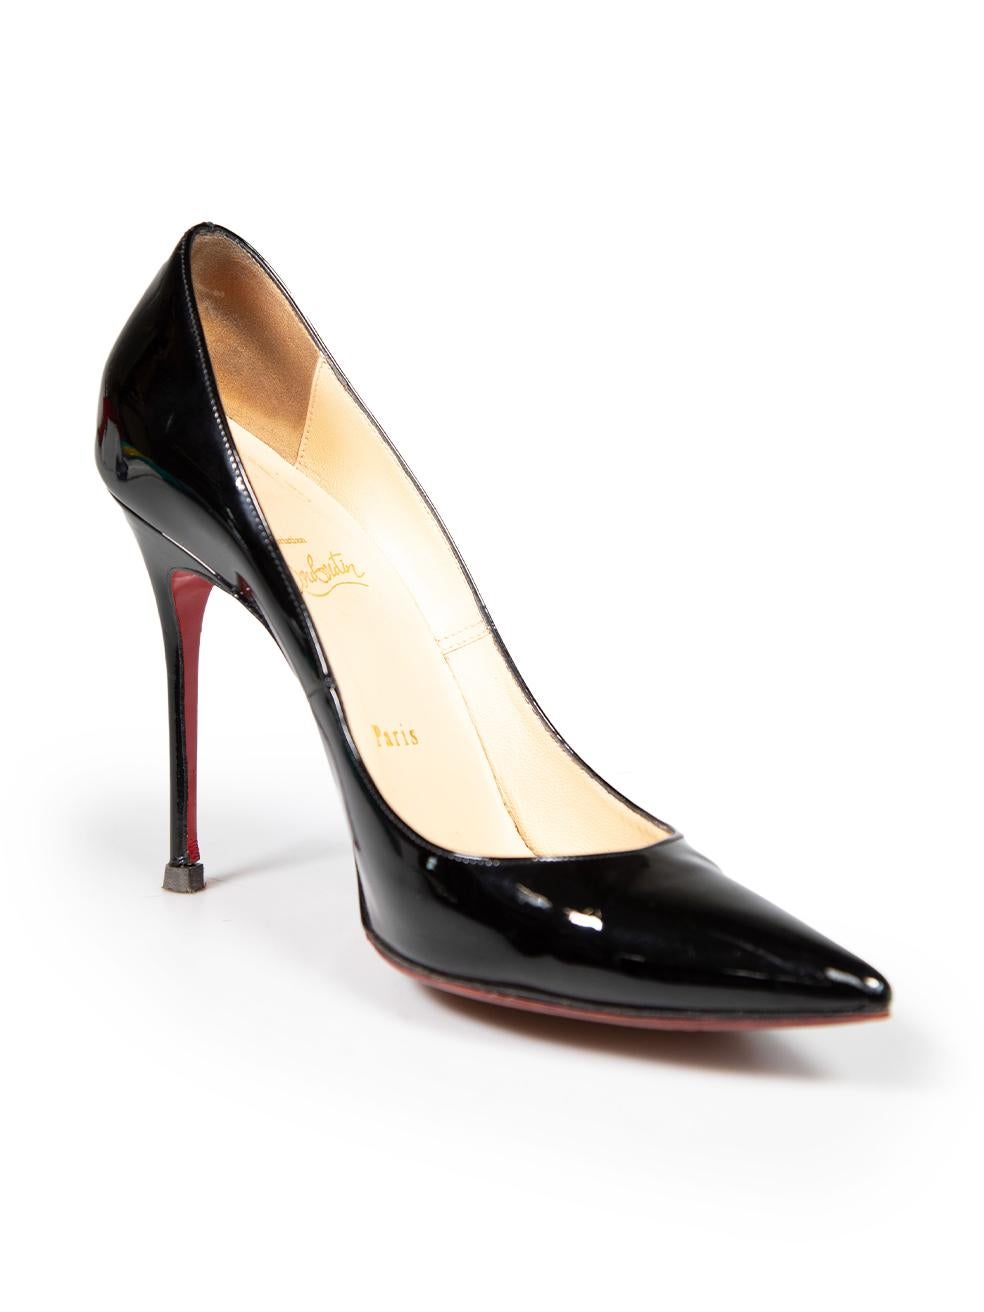 CONDITION is Good. Minor wear to heels is evident. Light wear to the sides in the front can be seen with creasing and slightly misshaping to leather insoles and discolouration marks. Please note that these Christian Louboutin heels have been